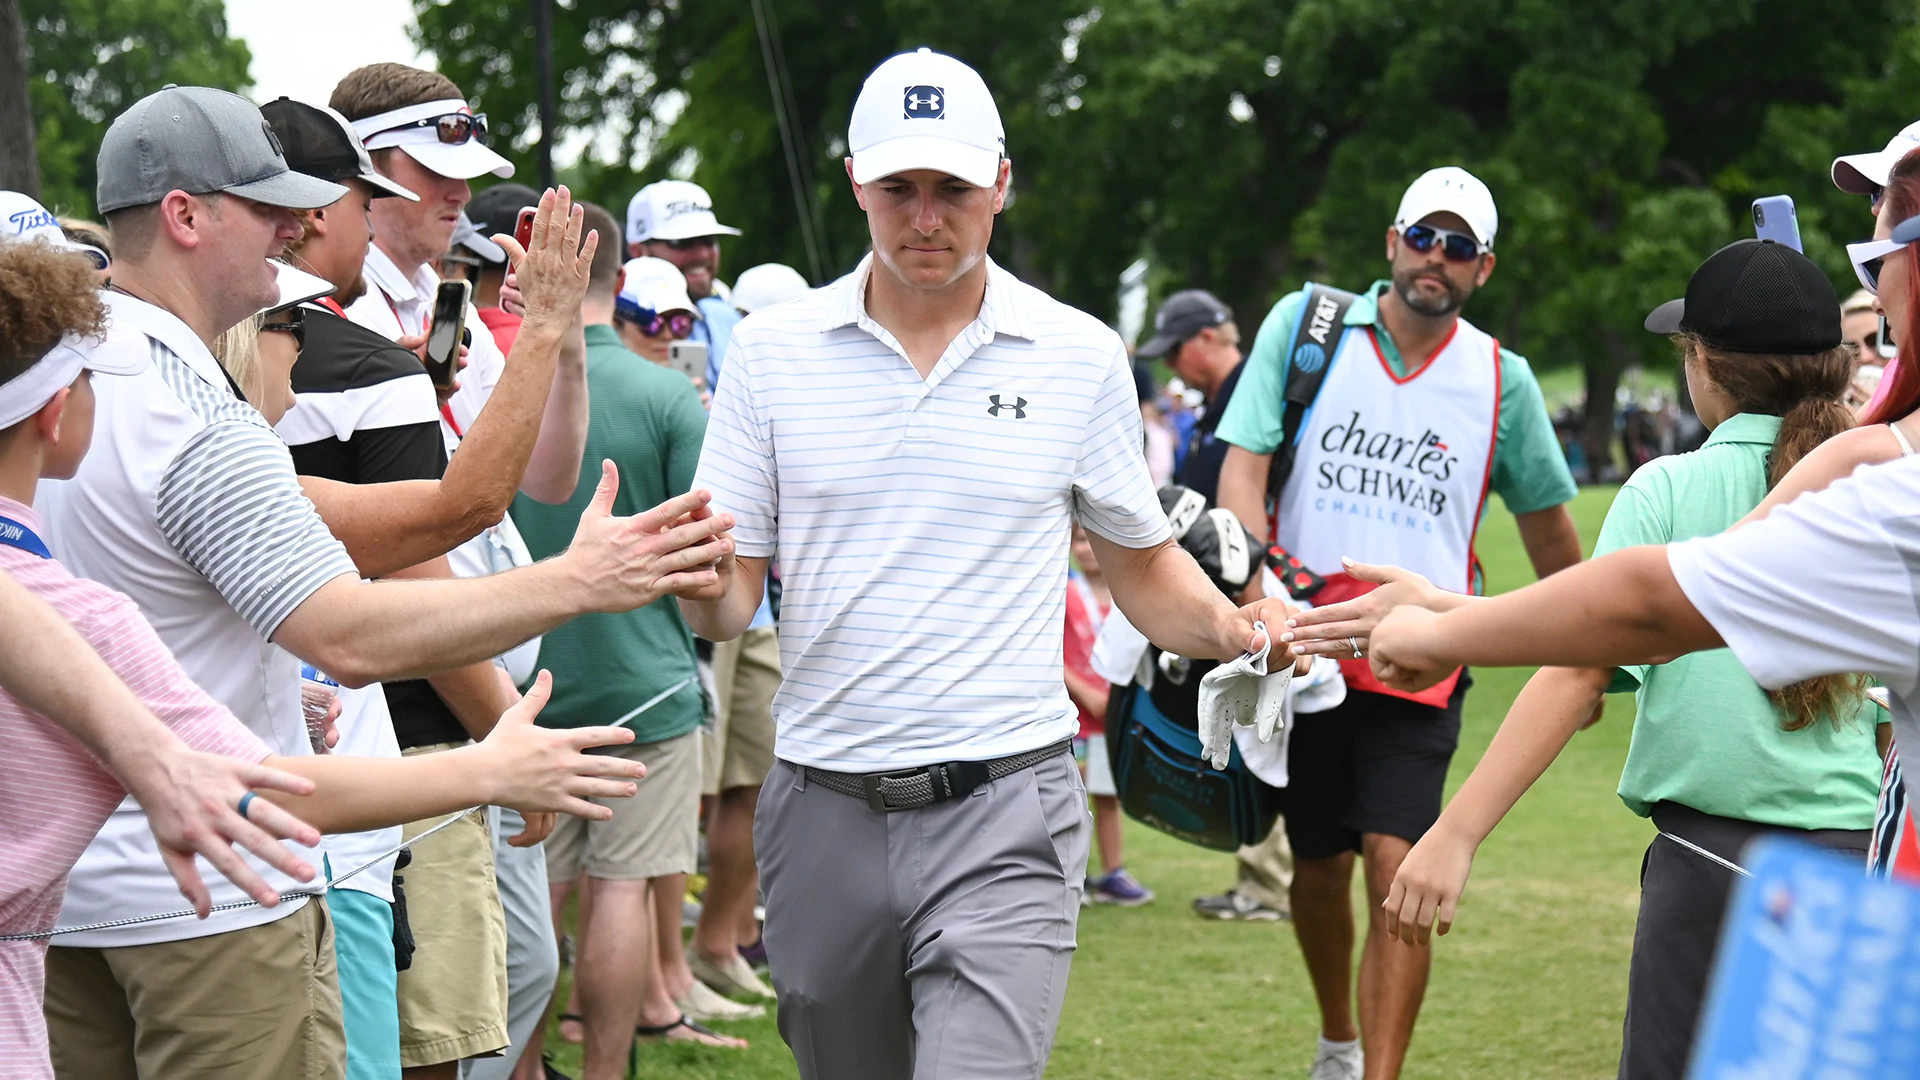 Mic’d Up Players, ‘Inside the Ropes’ Access: What Golf on TV Will Look Like This Week on CBS